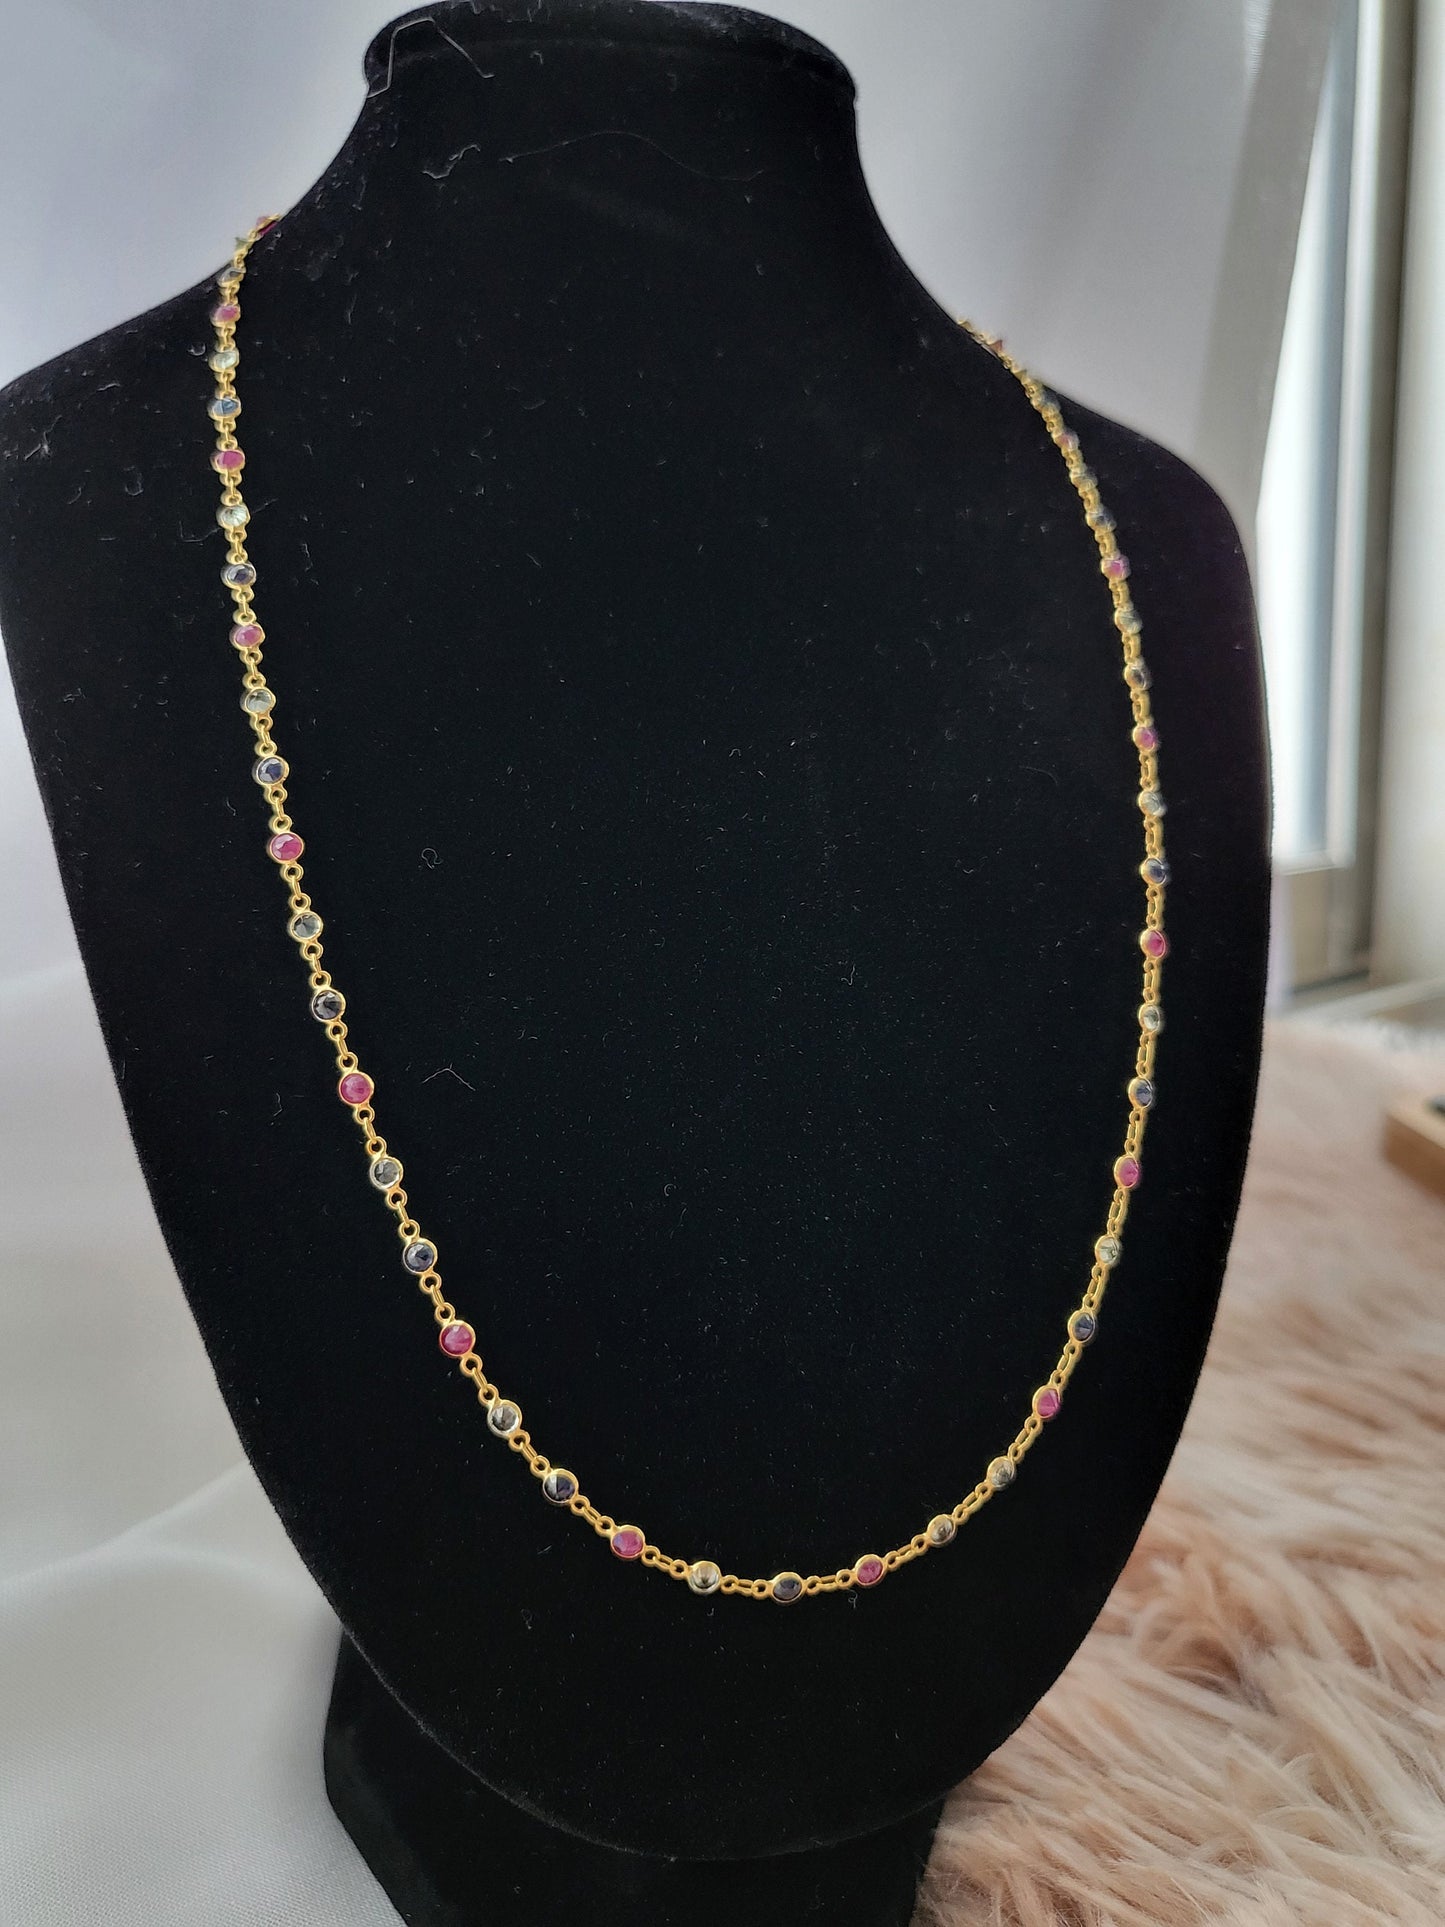 Thai Design Natural Ruby Sapphire Blue Green 18K Solid Gold Necklace Rare Gemstone Dainty